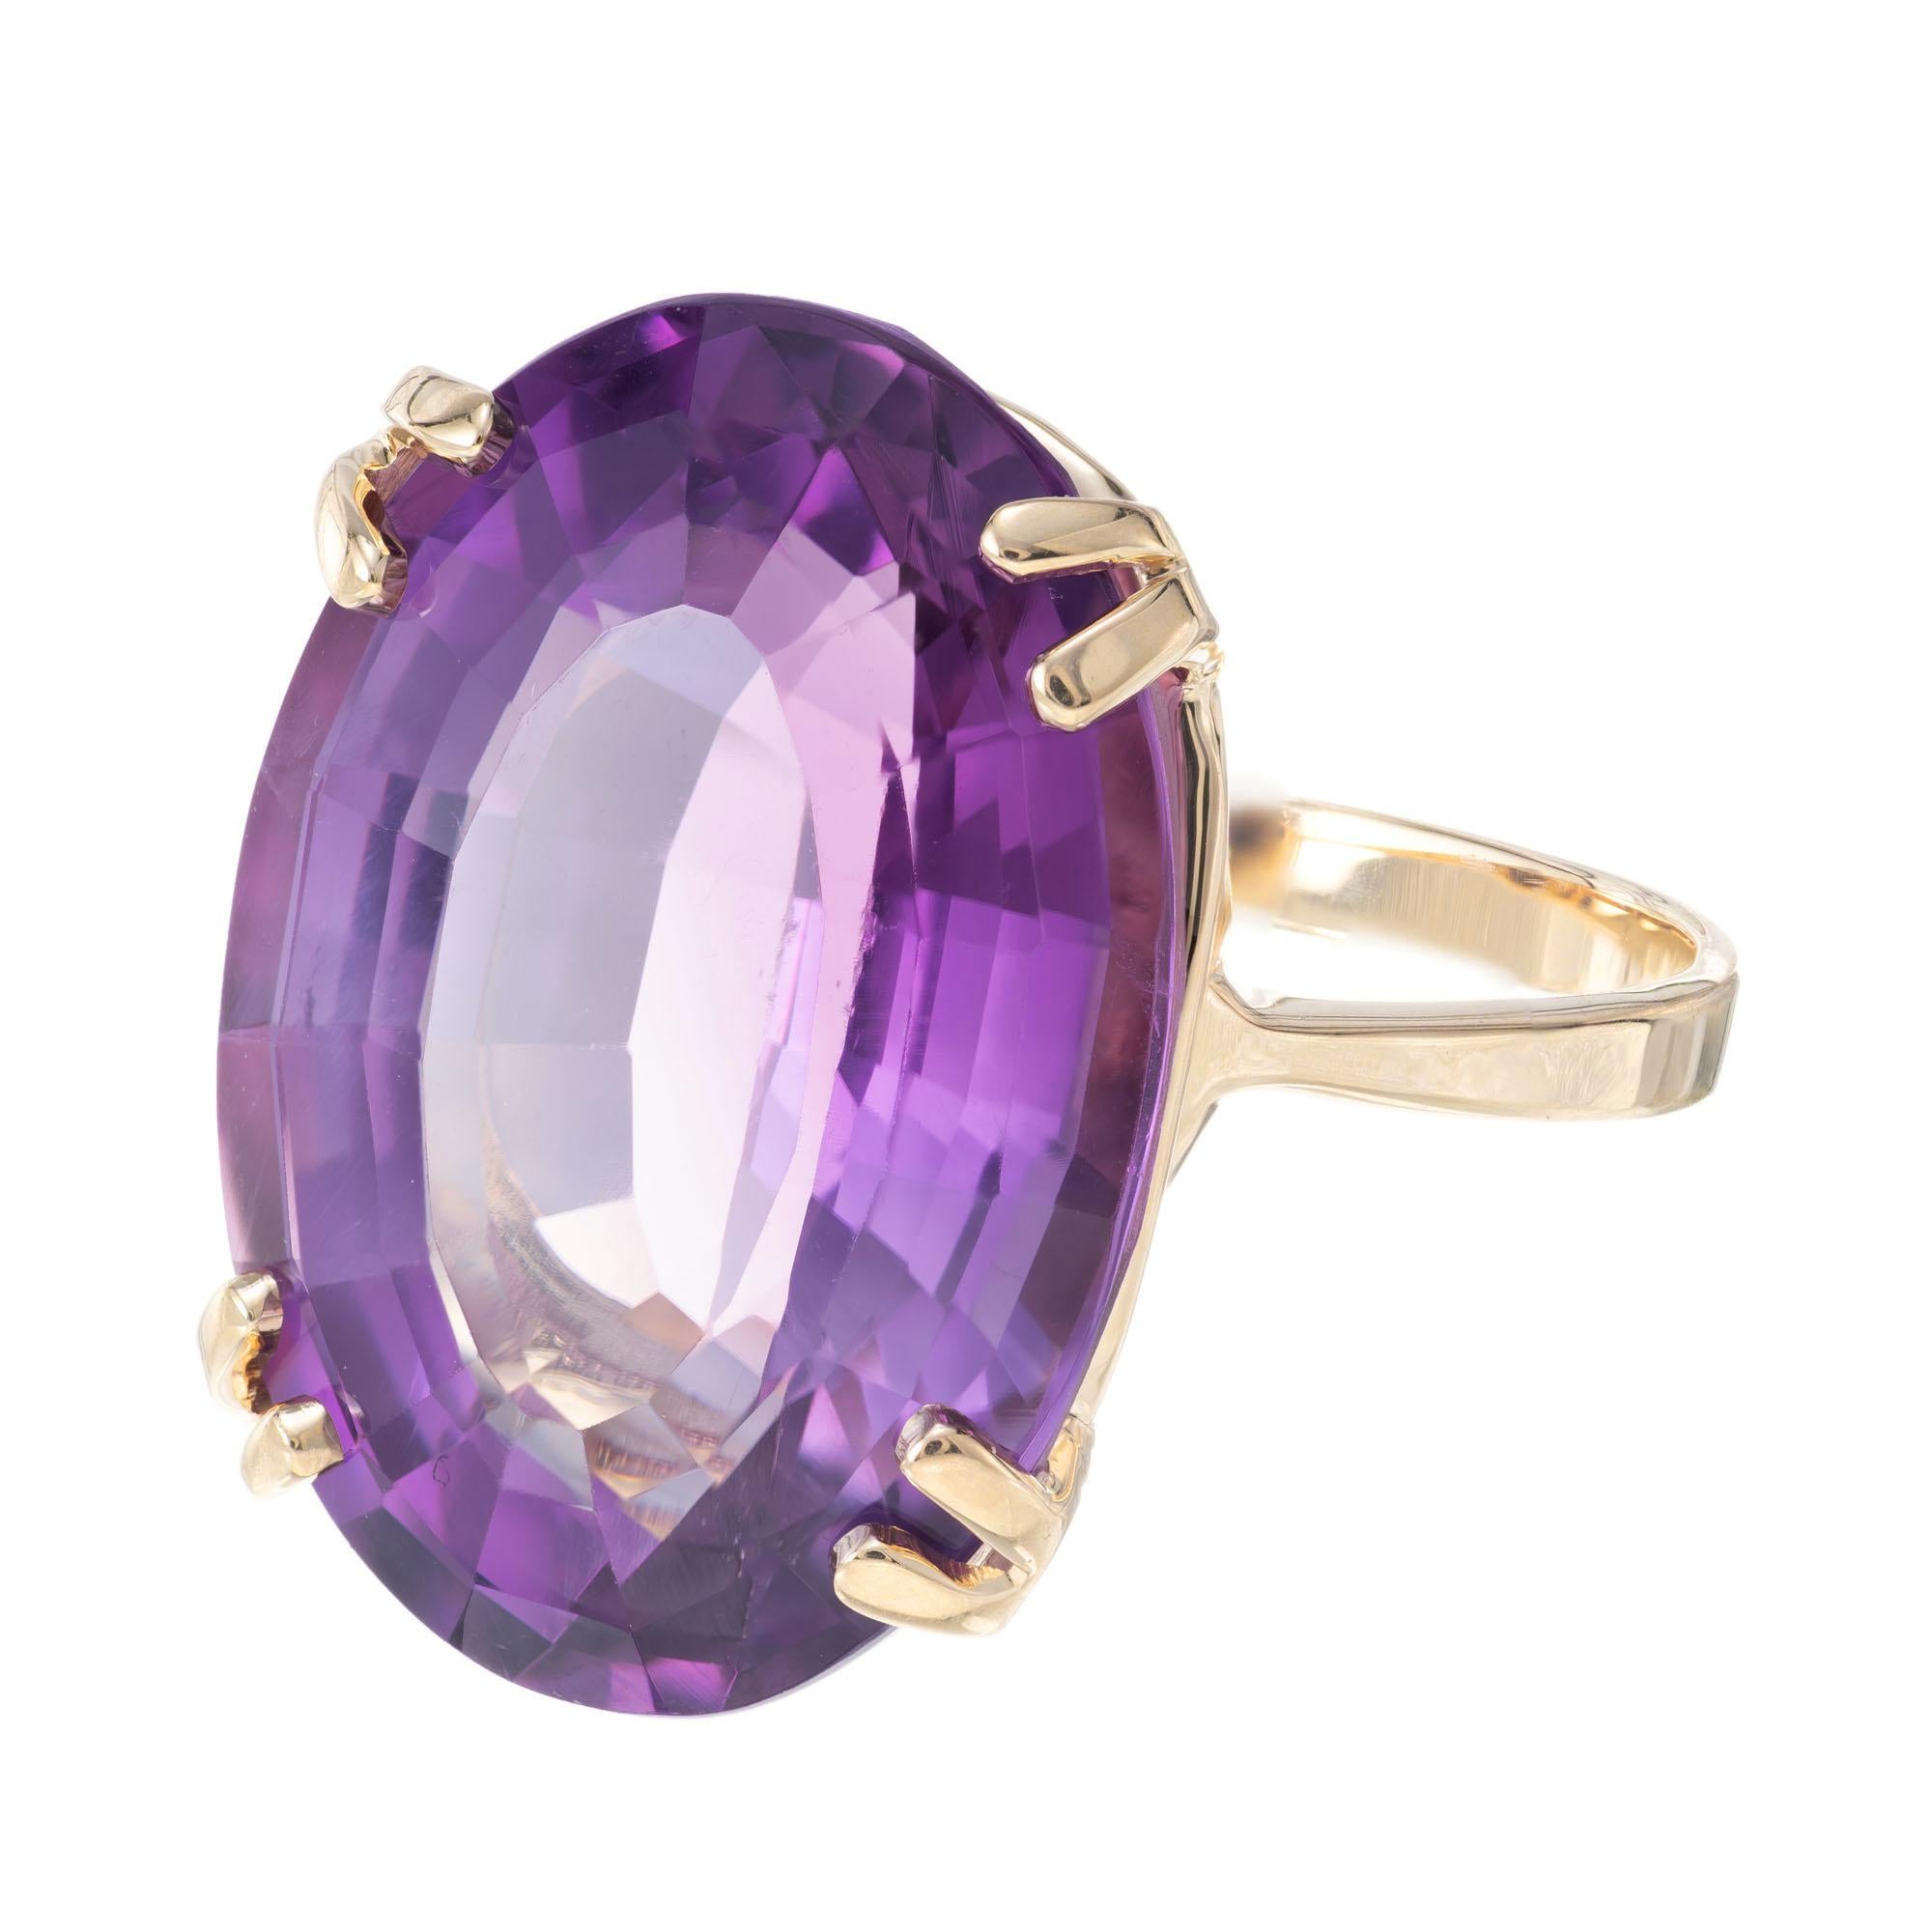 Mid- Century Amethyst cocktail ring. 18.00 carat oval amethyst in a simply double 4 prong 14k yellow gold setting.  Circa 1950's.

1 oval purple amethyst, approx. 18.00cts
Size 7 and sizable
14k yellow gold 
Stamped: 14k
7.2 grams
Width at top: